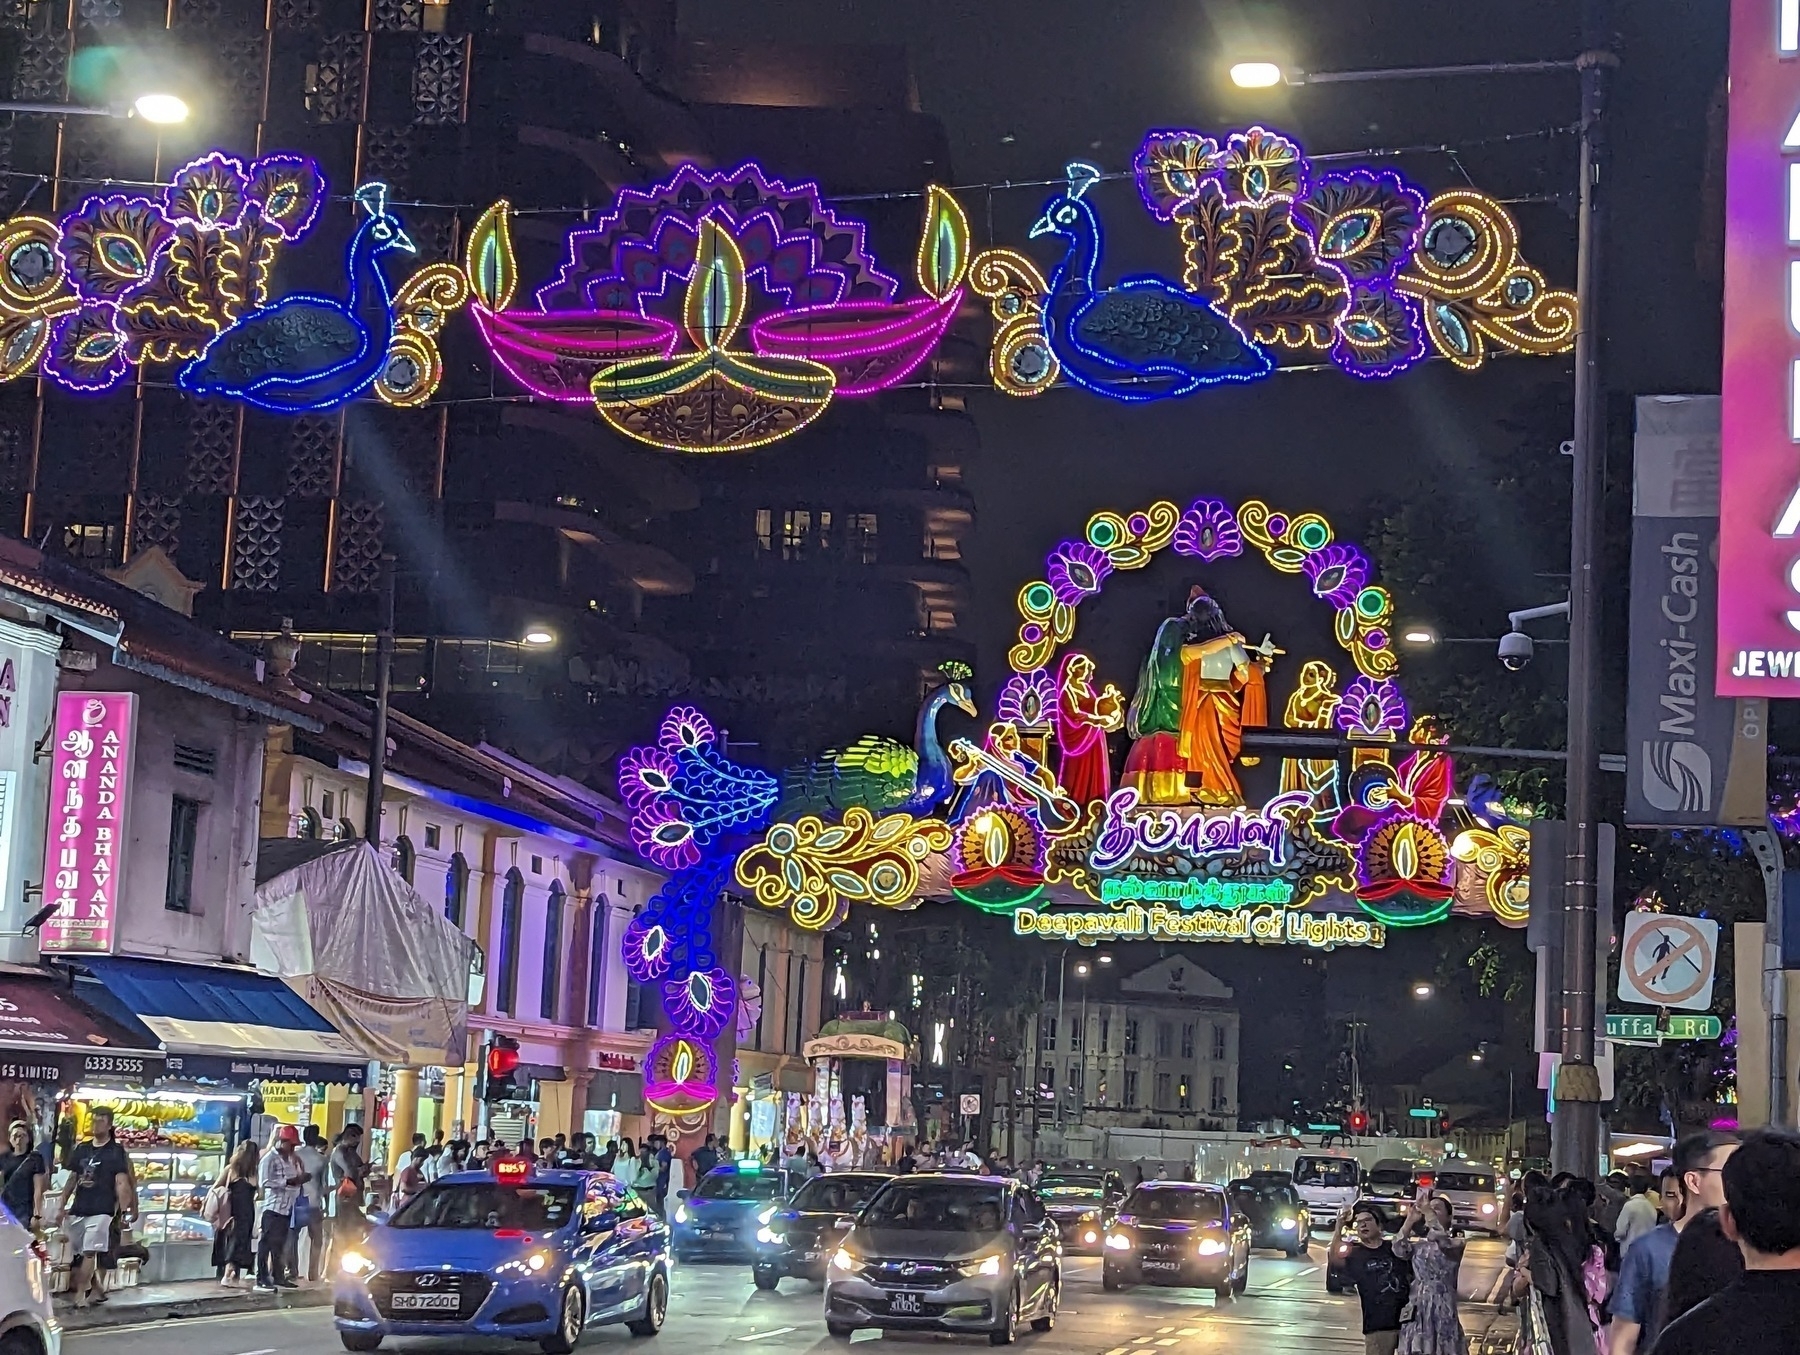 A city road at night, with cars driving towards the camera, and yellow, purple, and blue lights strung up above the street, featuring peacocks and Rangoli decorations celebrating Diwali